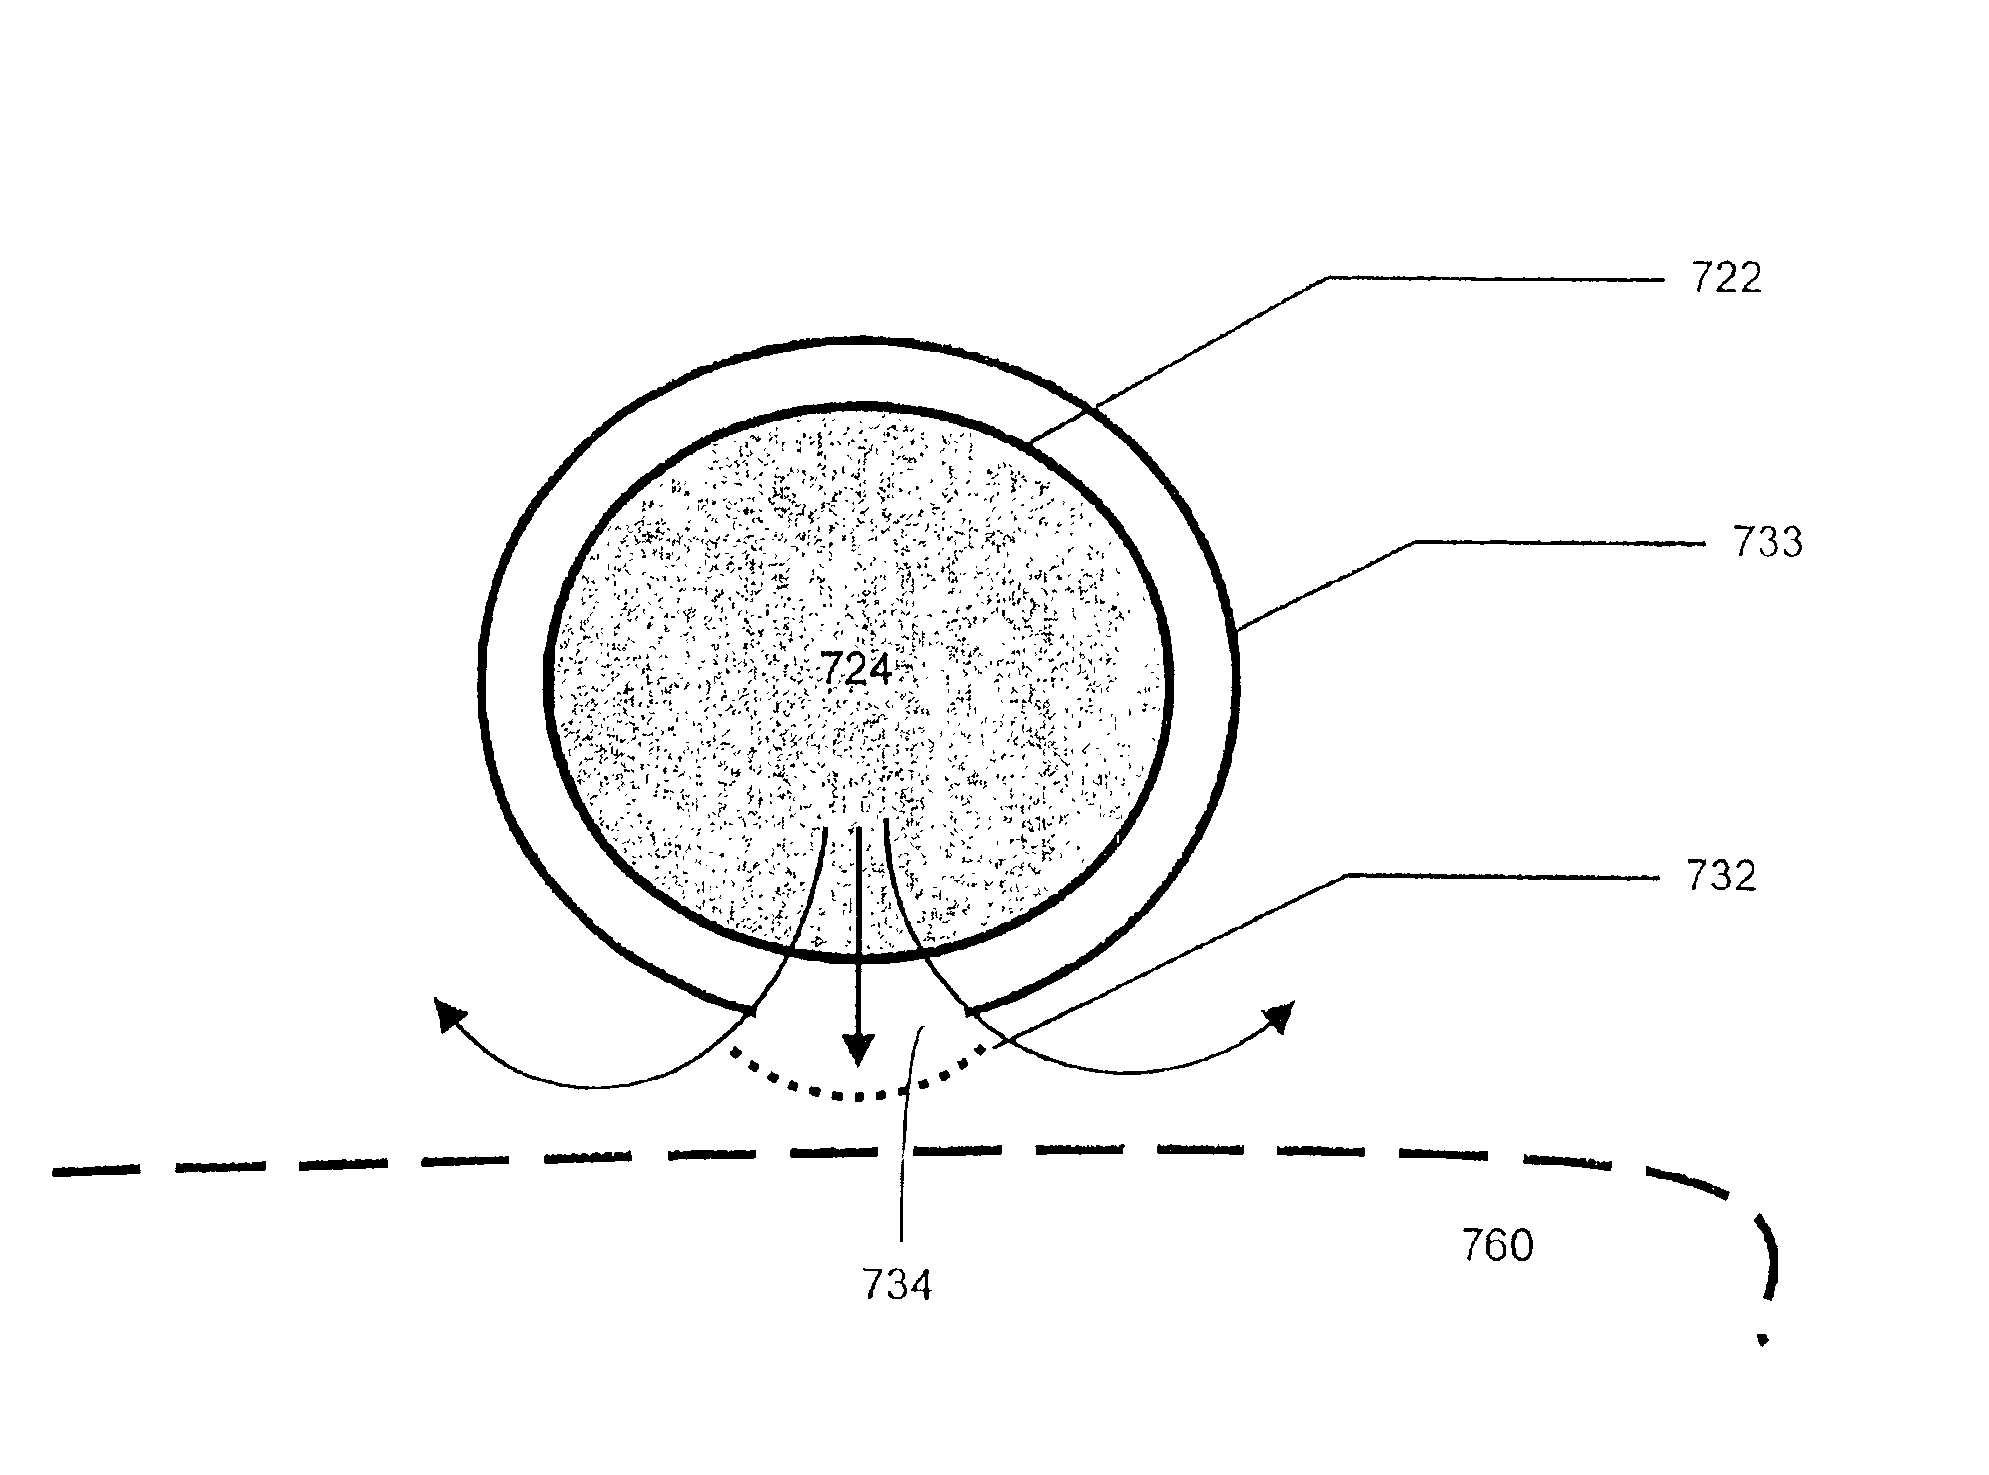 Variable length electrodes for delivery of irrigated ablation